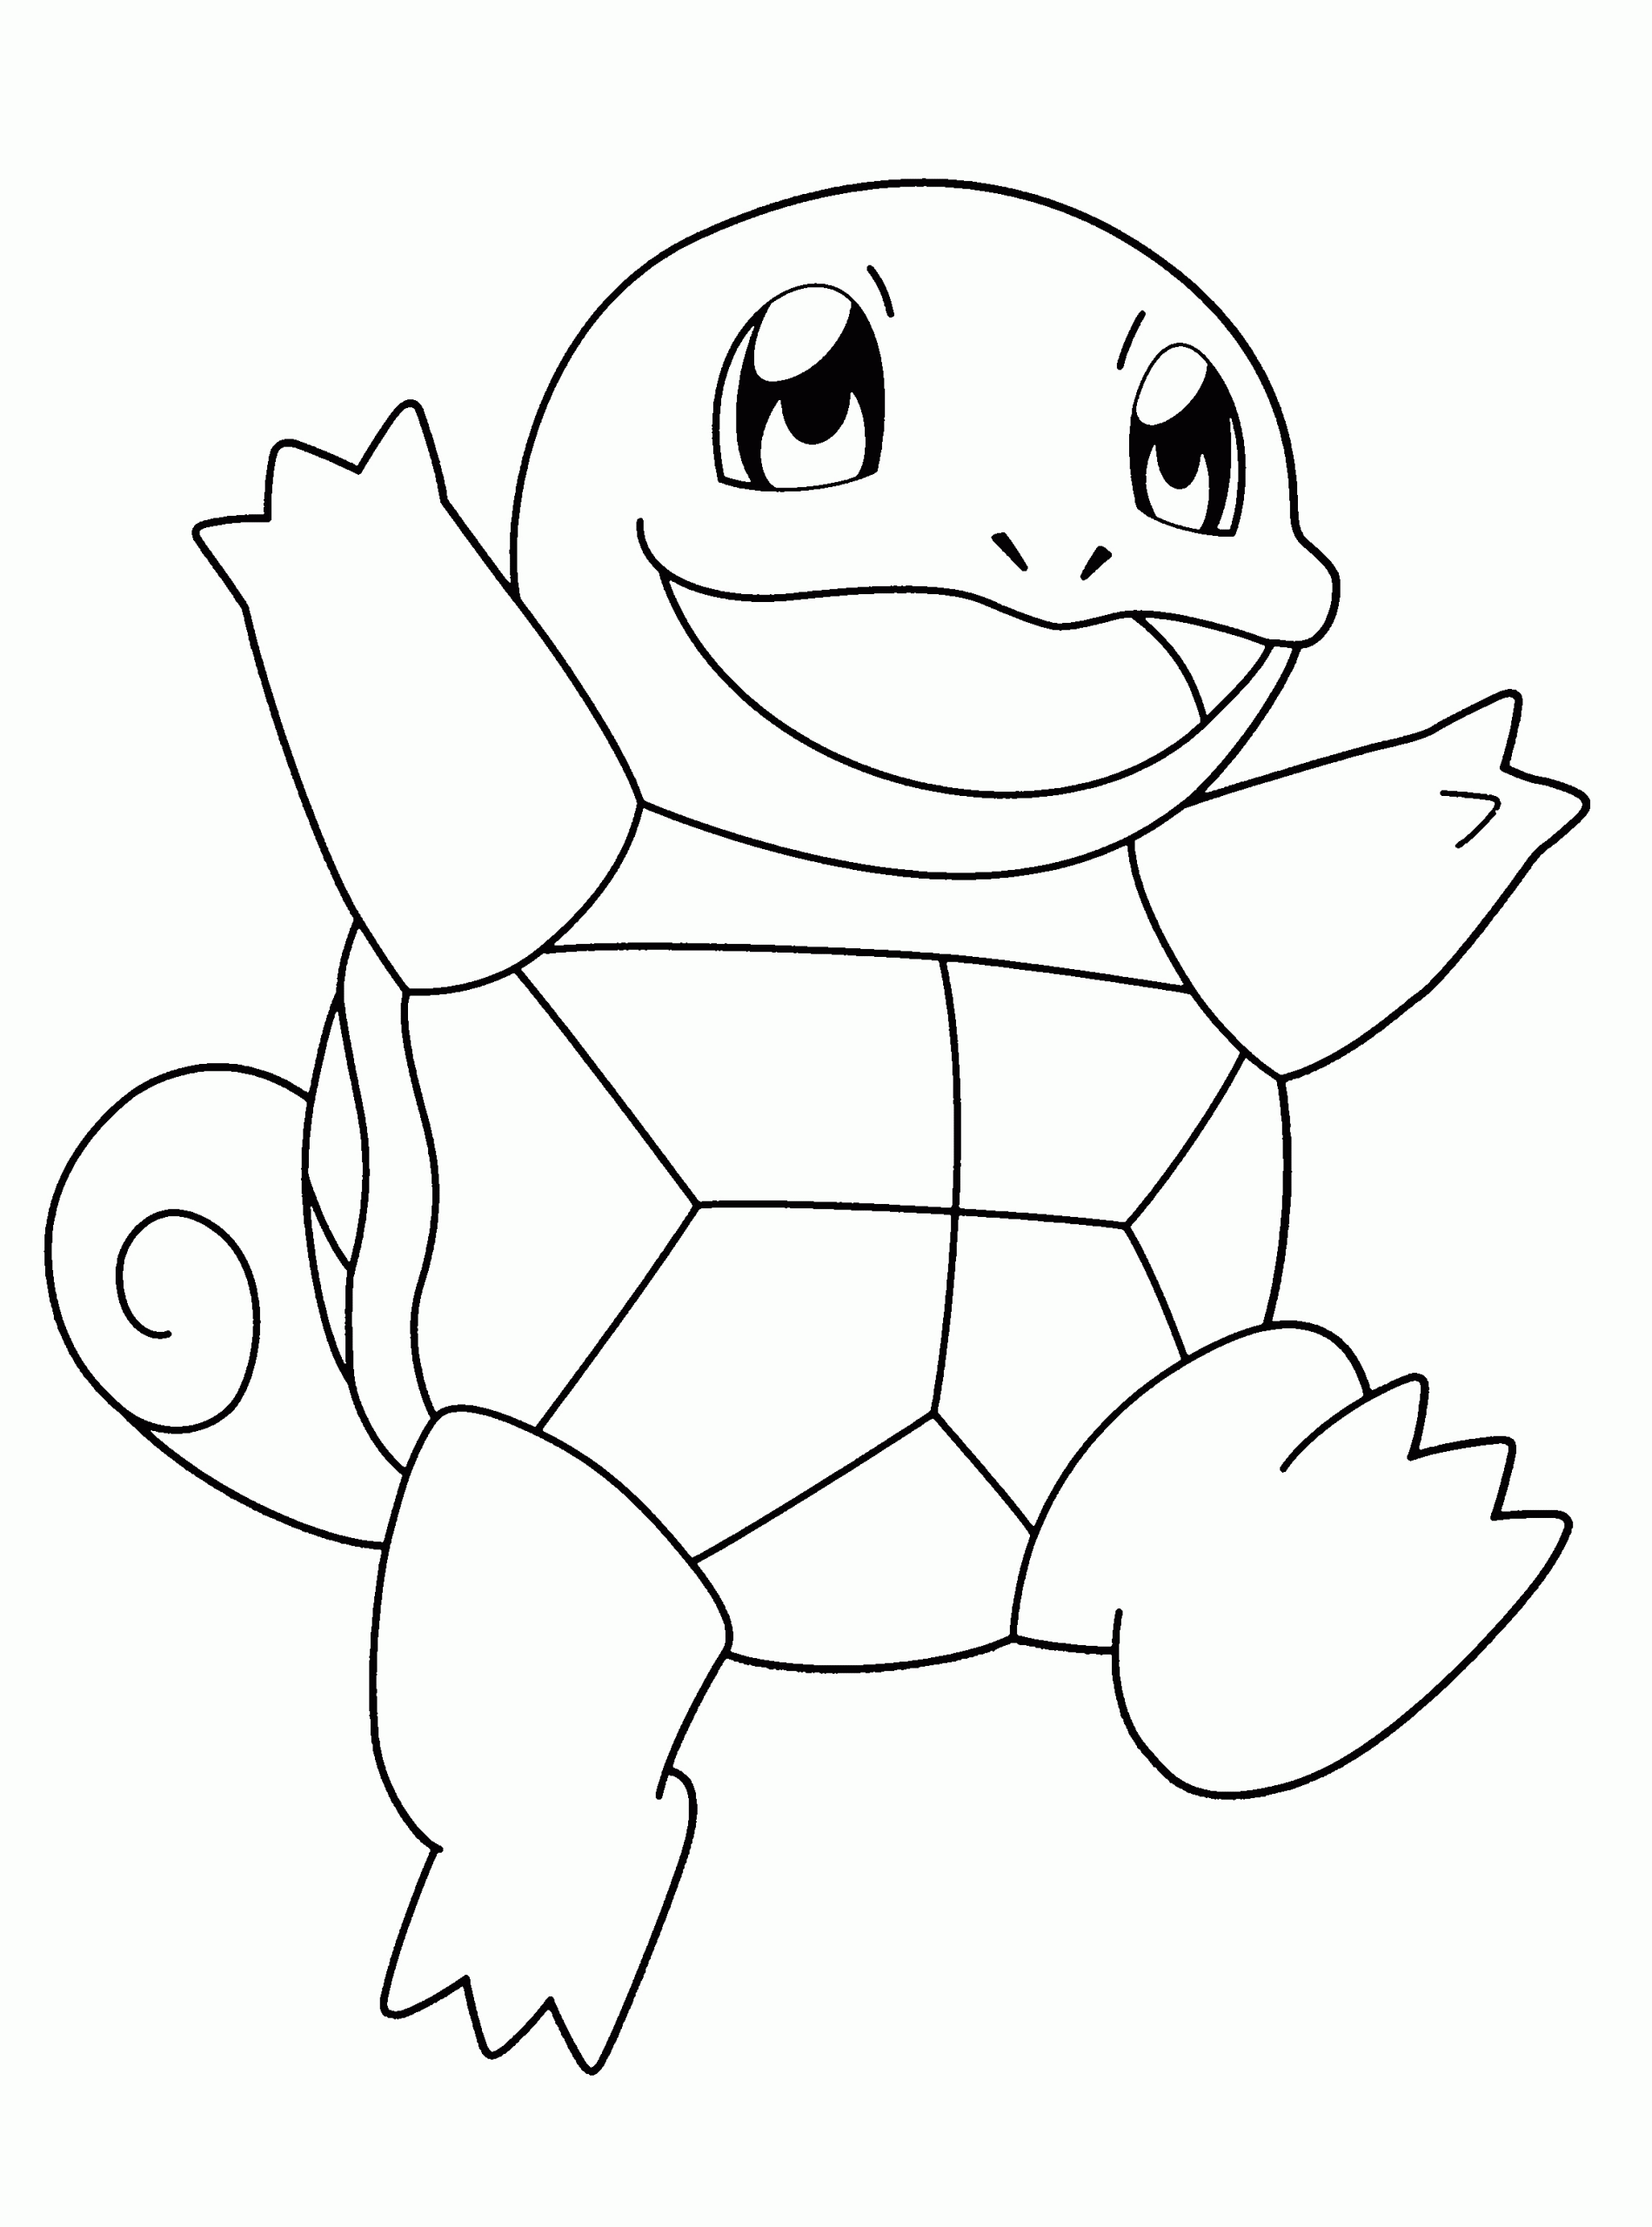 Coloring Pages For Kids Pokemon
 Pokemon to color for kids All Pokemon coloring pages